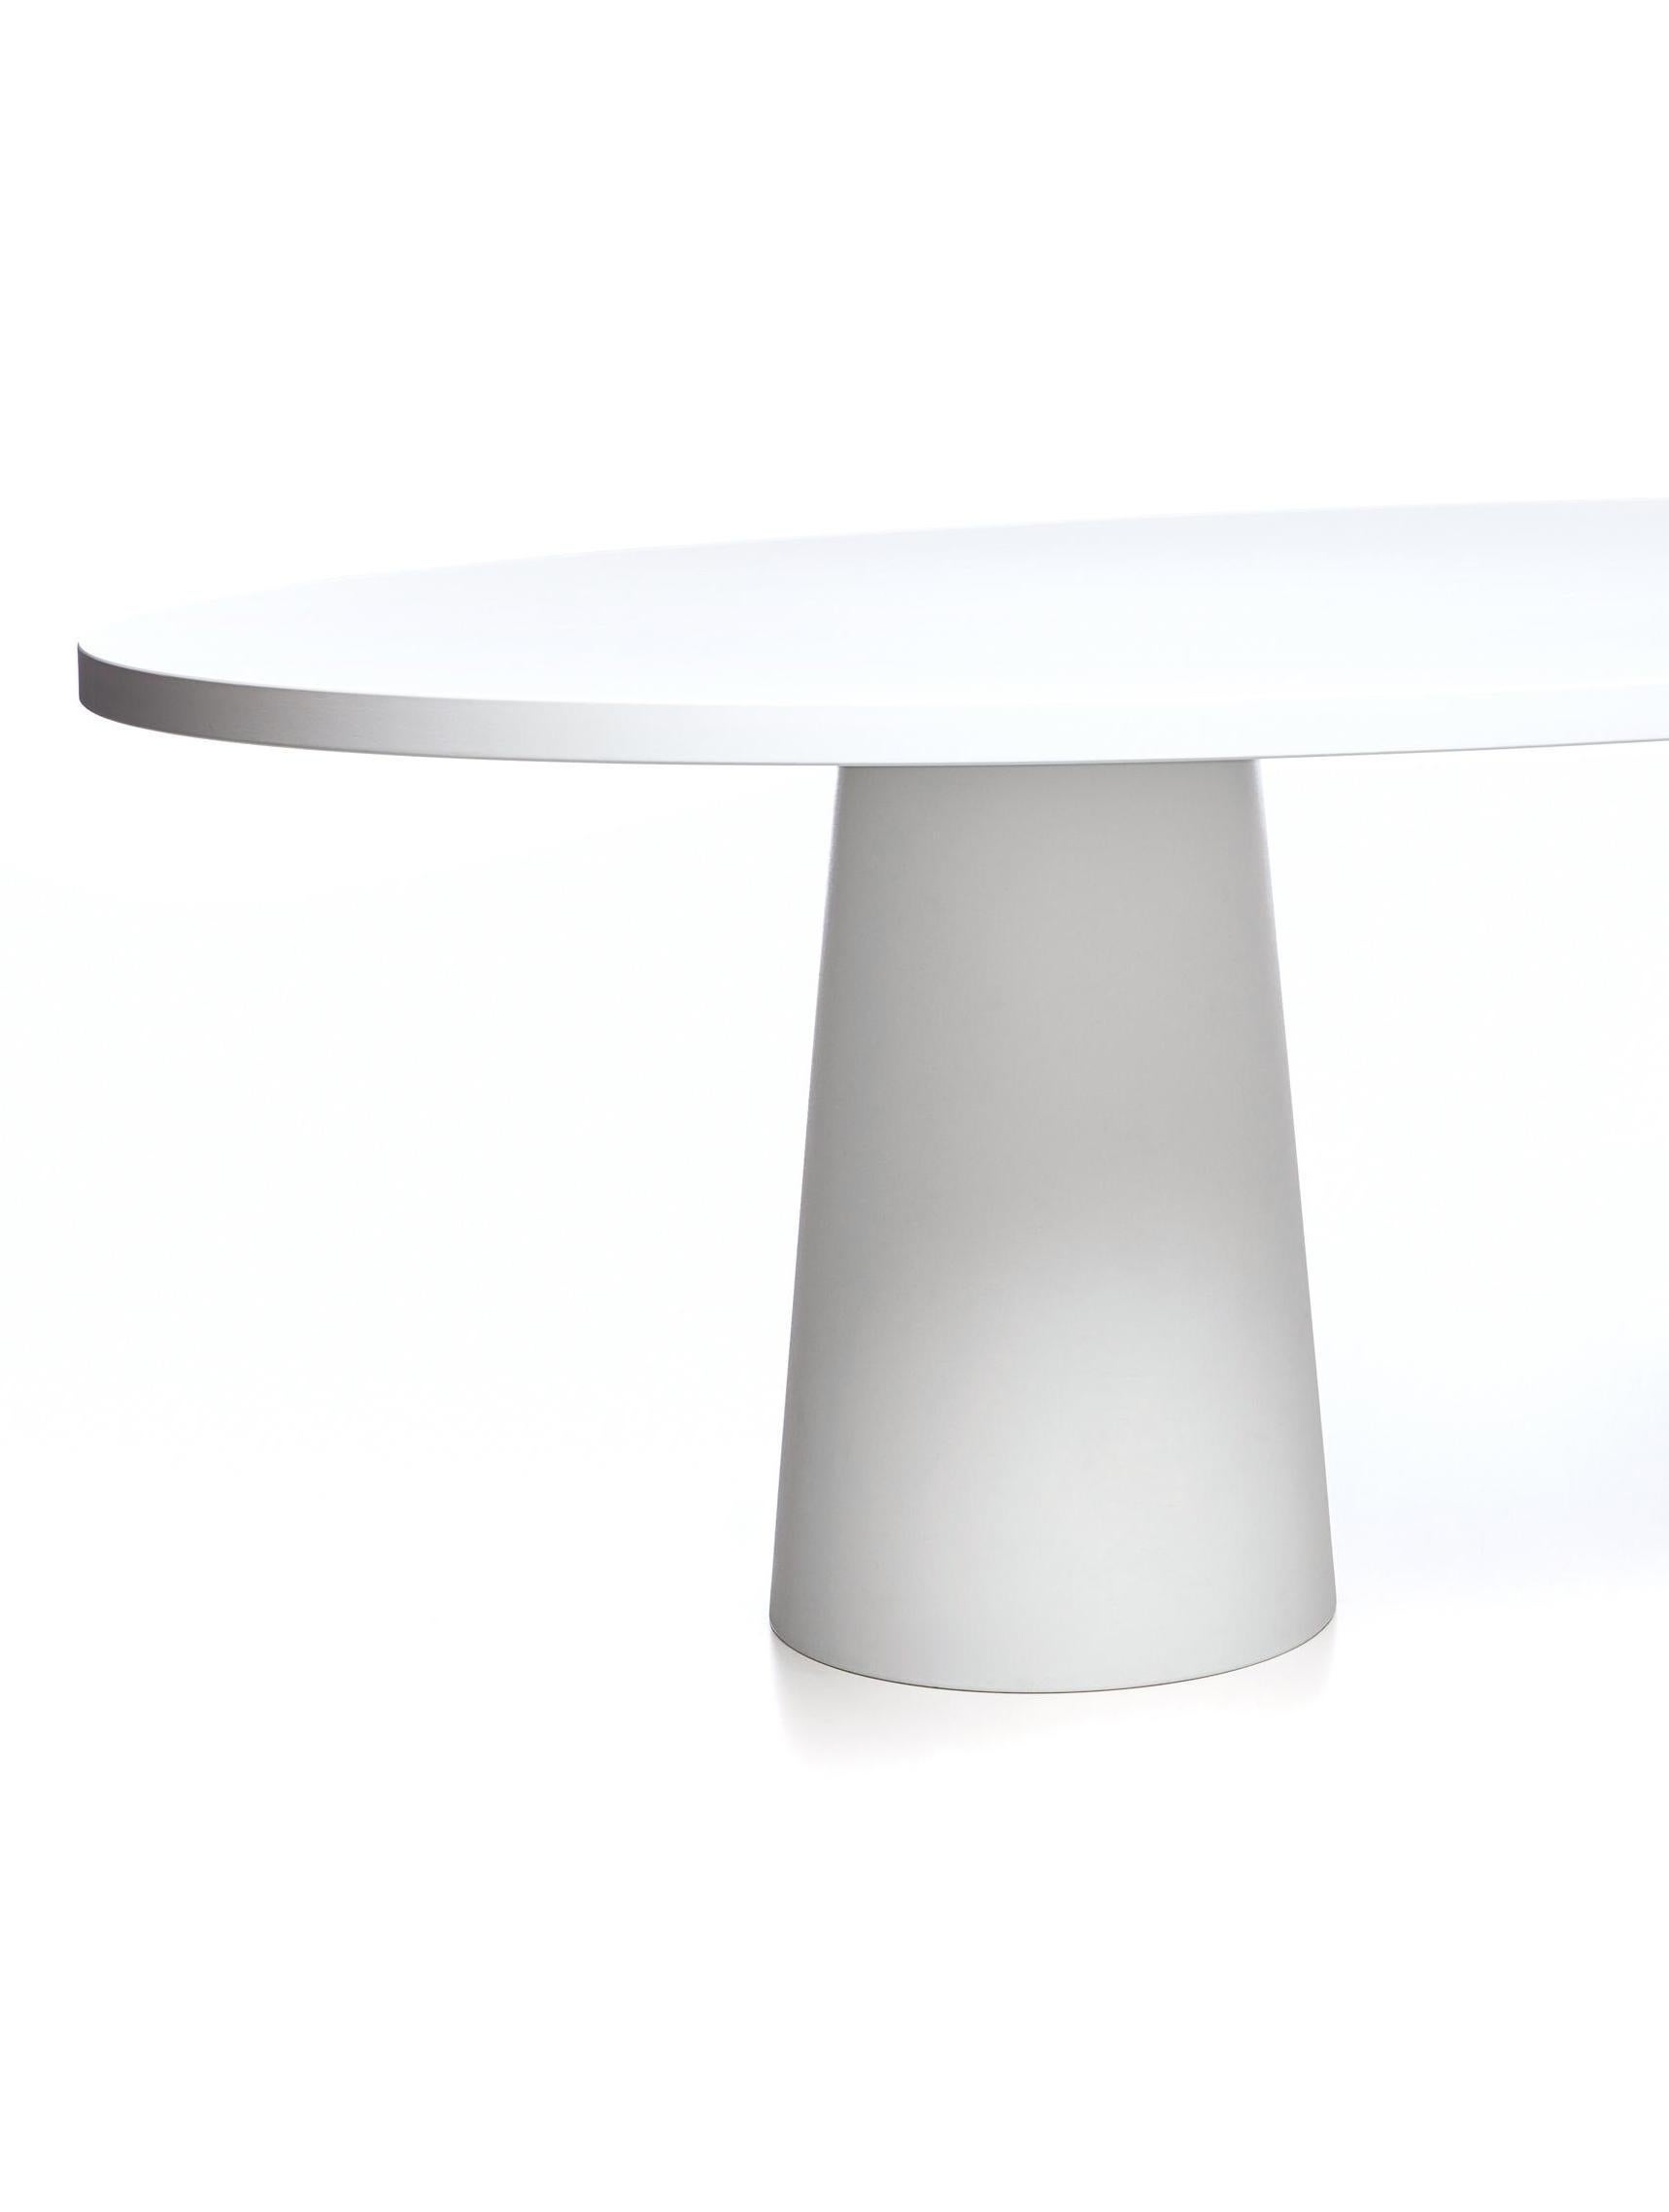 Moooi container dining table with oval top and base in white by Marcel Wanders. White laquered wood top; white Classic base.

The feet must be filled with sand to create extra stability. 

Size: 210 x 135 x 71 H.
 